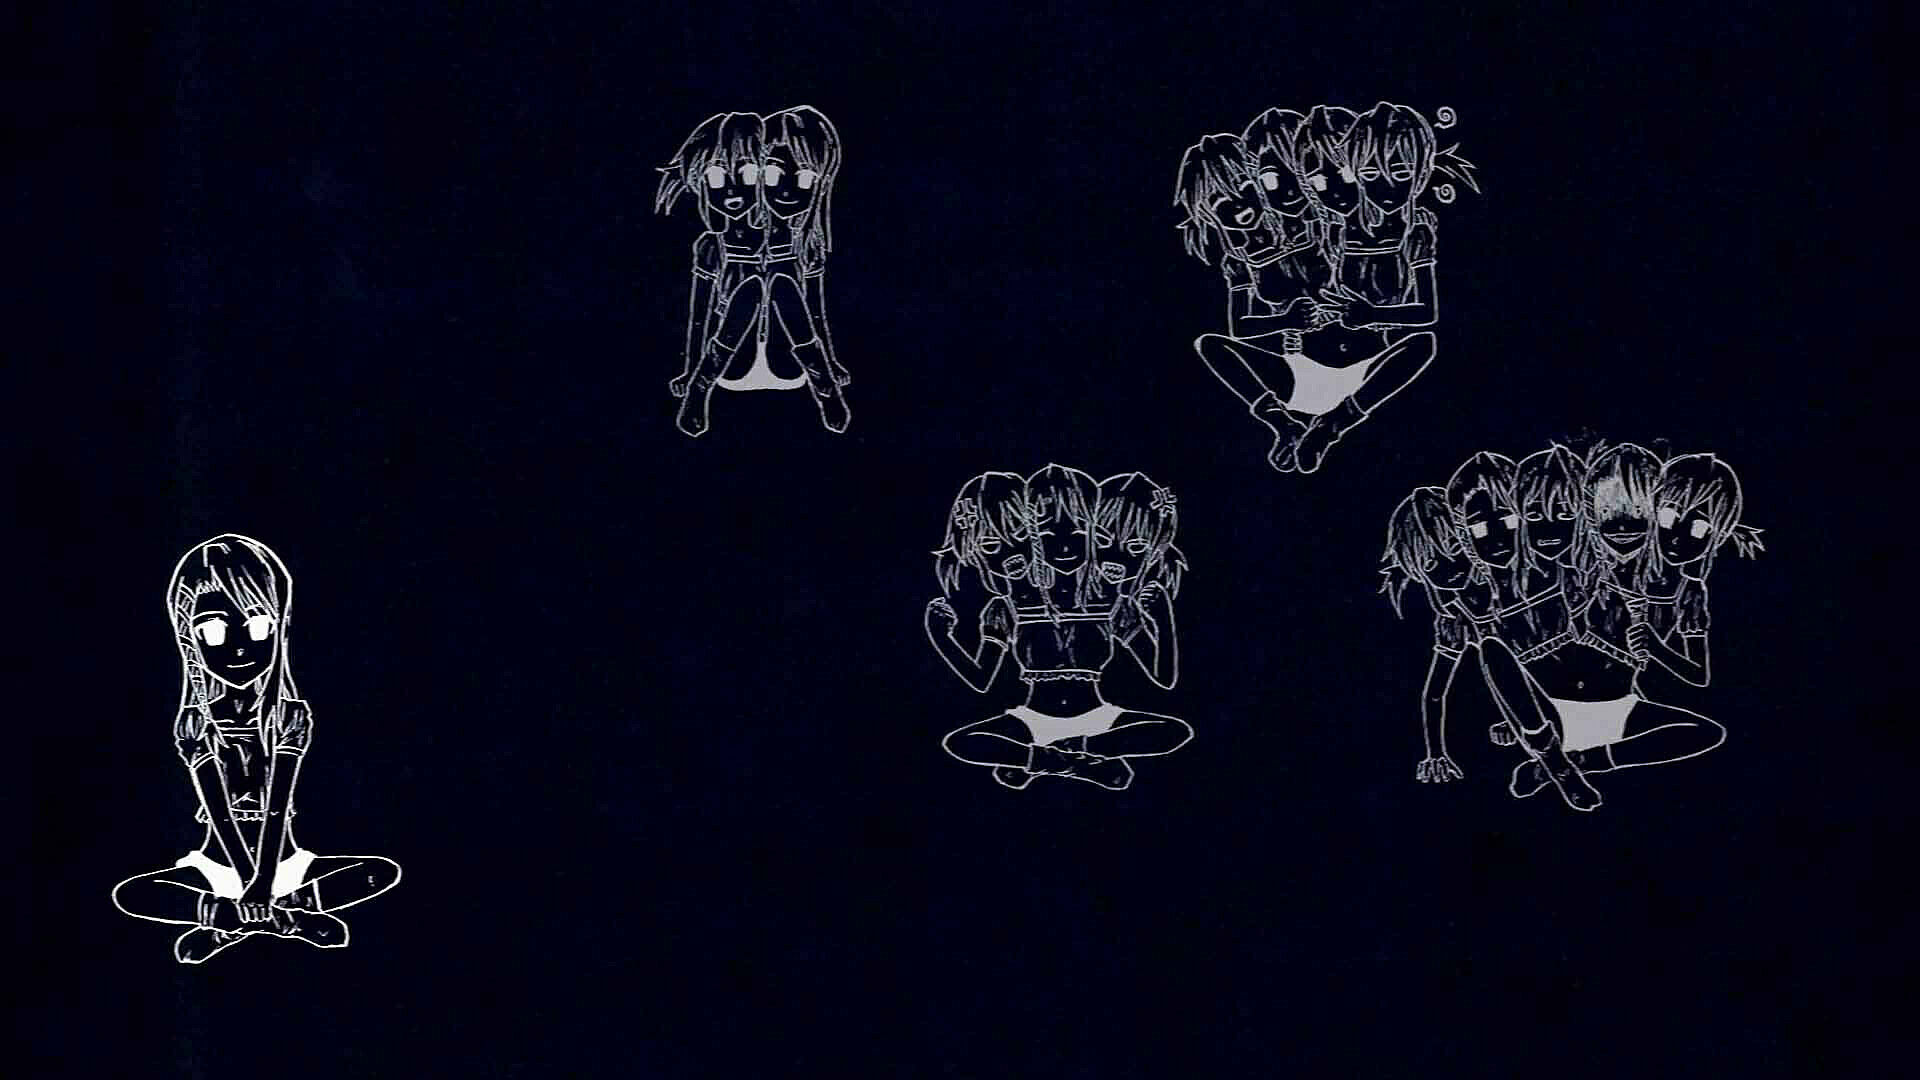 A still from a video work by Andrea Crespo. Cartoon figures outlined in white on a black ground.